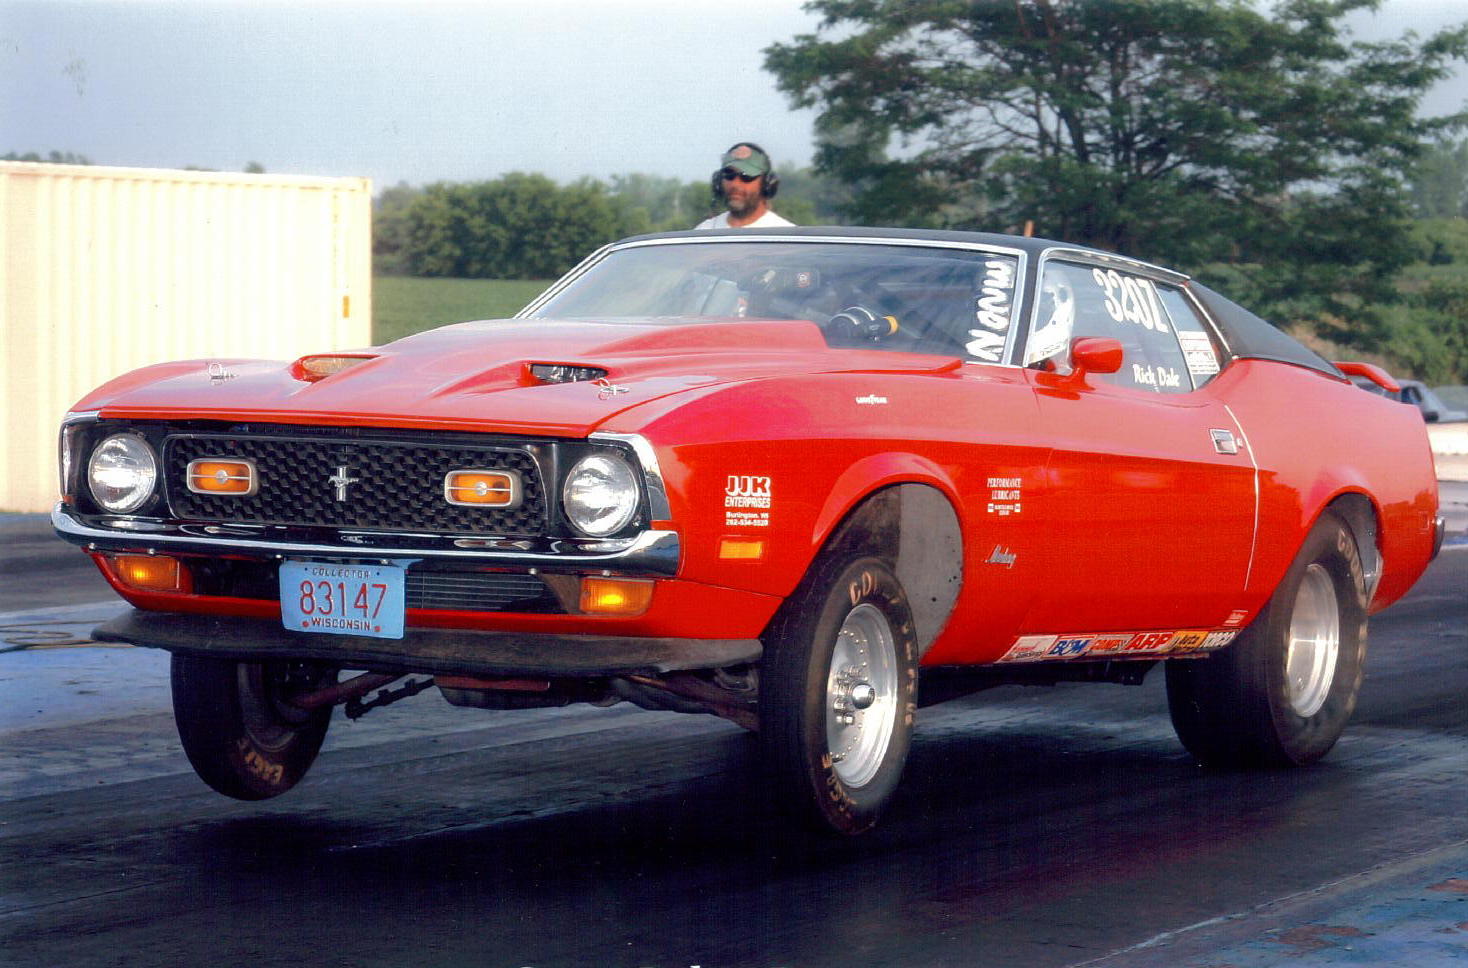  1971 Ford Mustang Mach 1